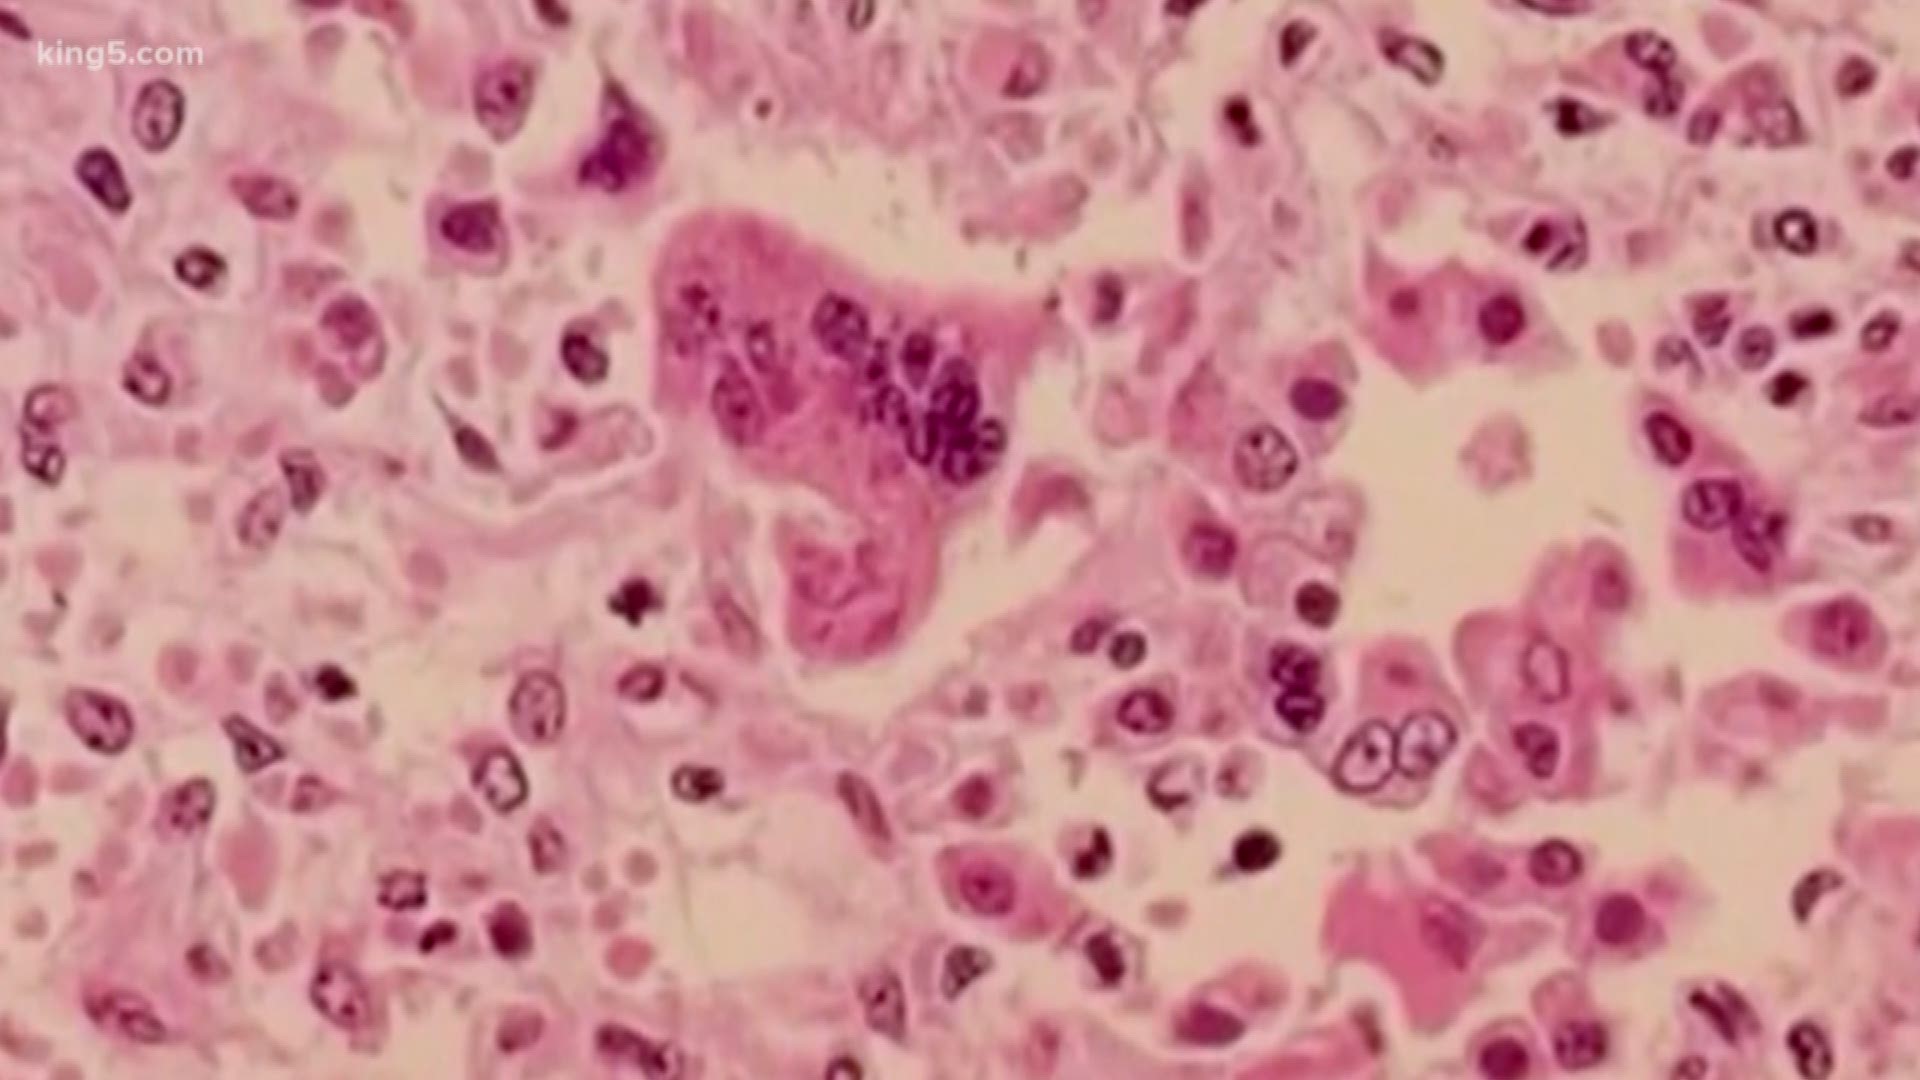 A 6 month old baby is the latest case of measles identified in Washington